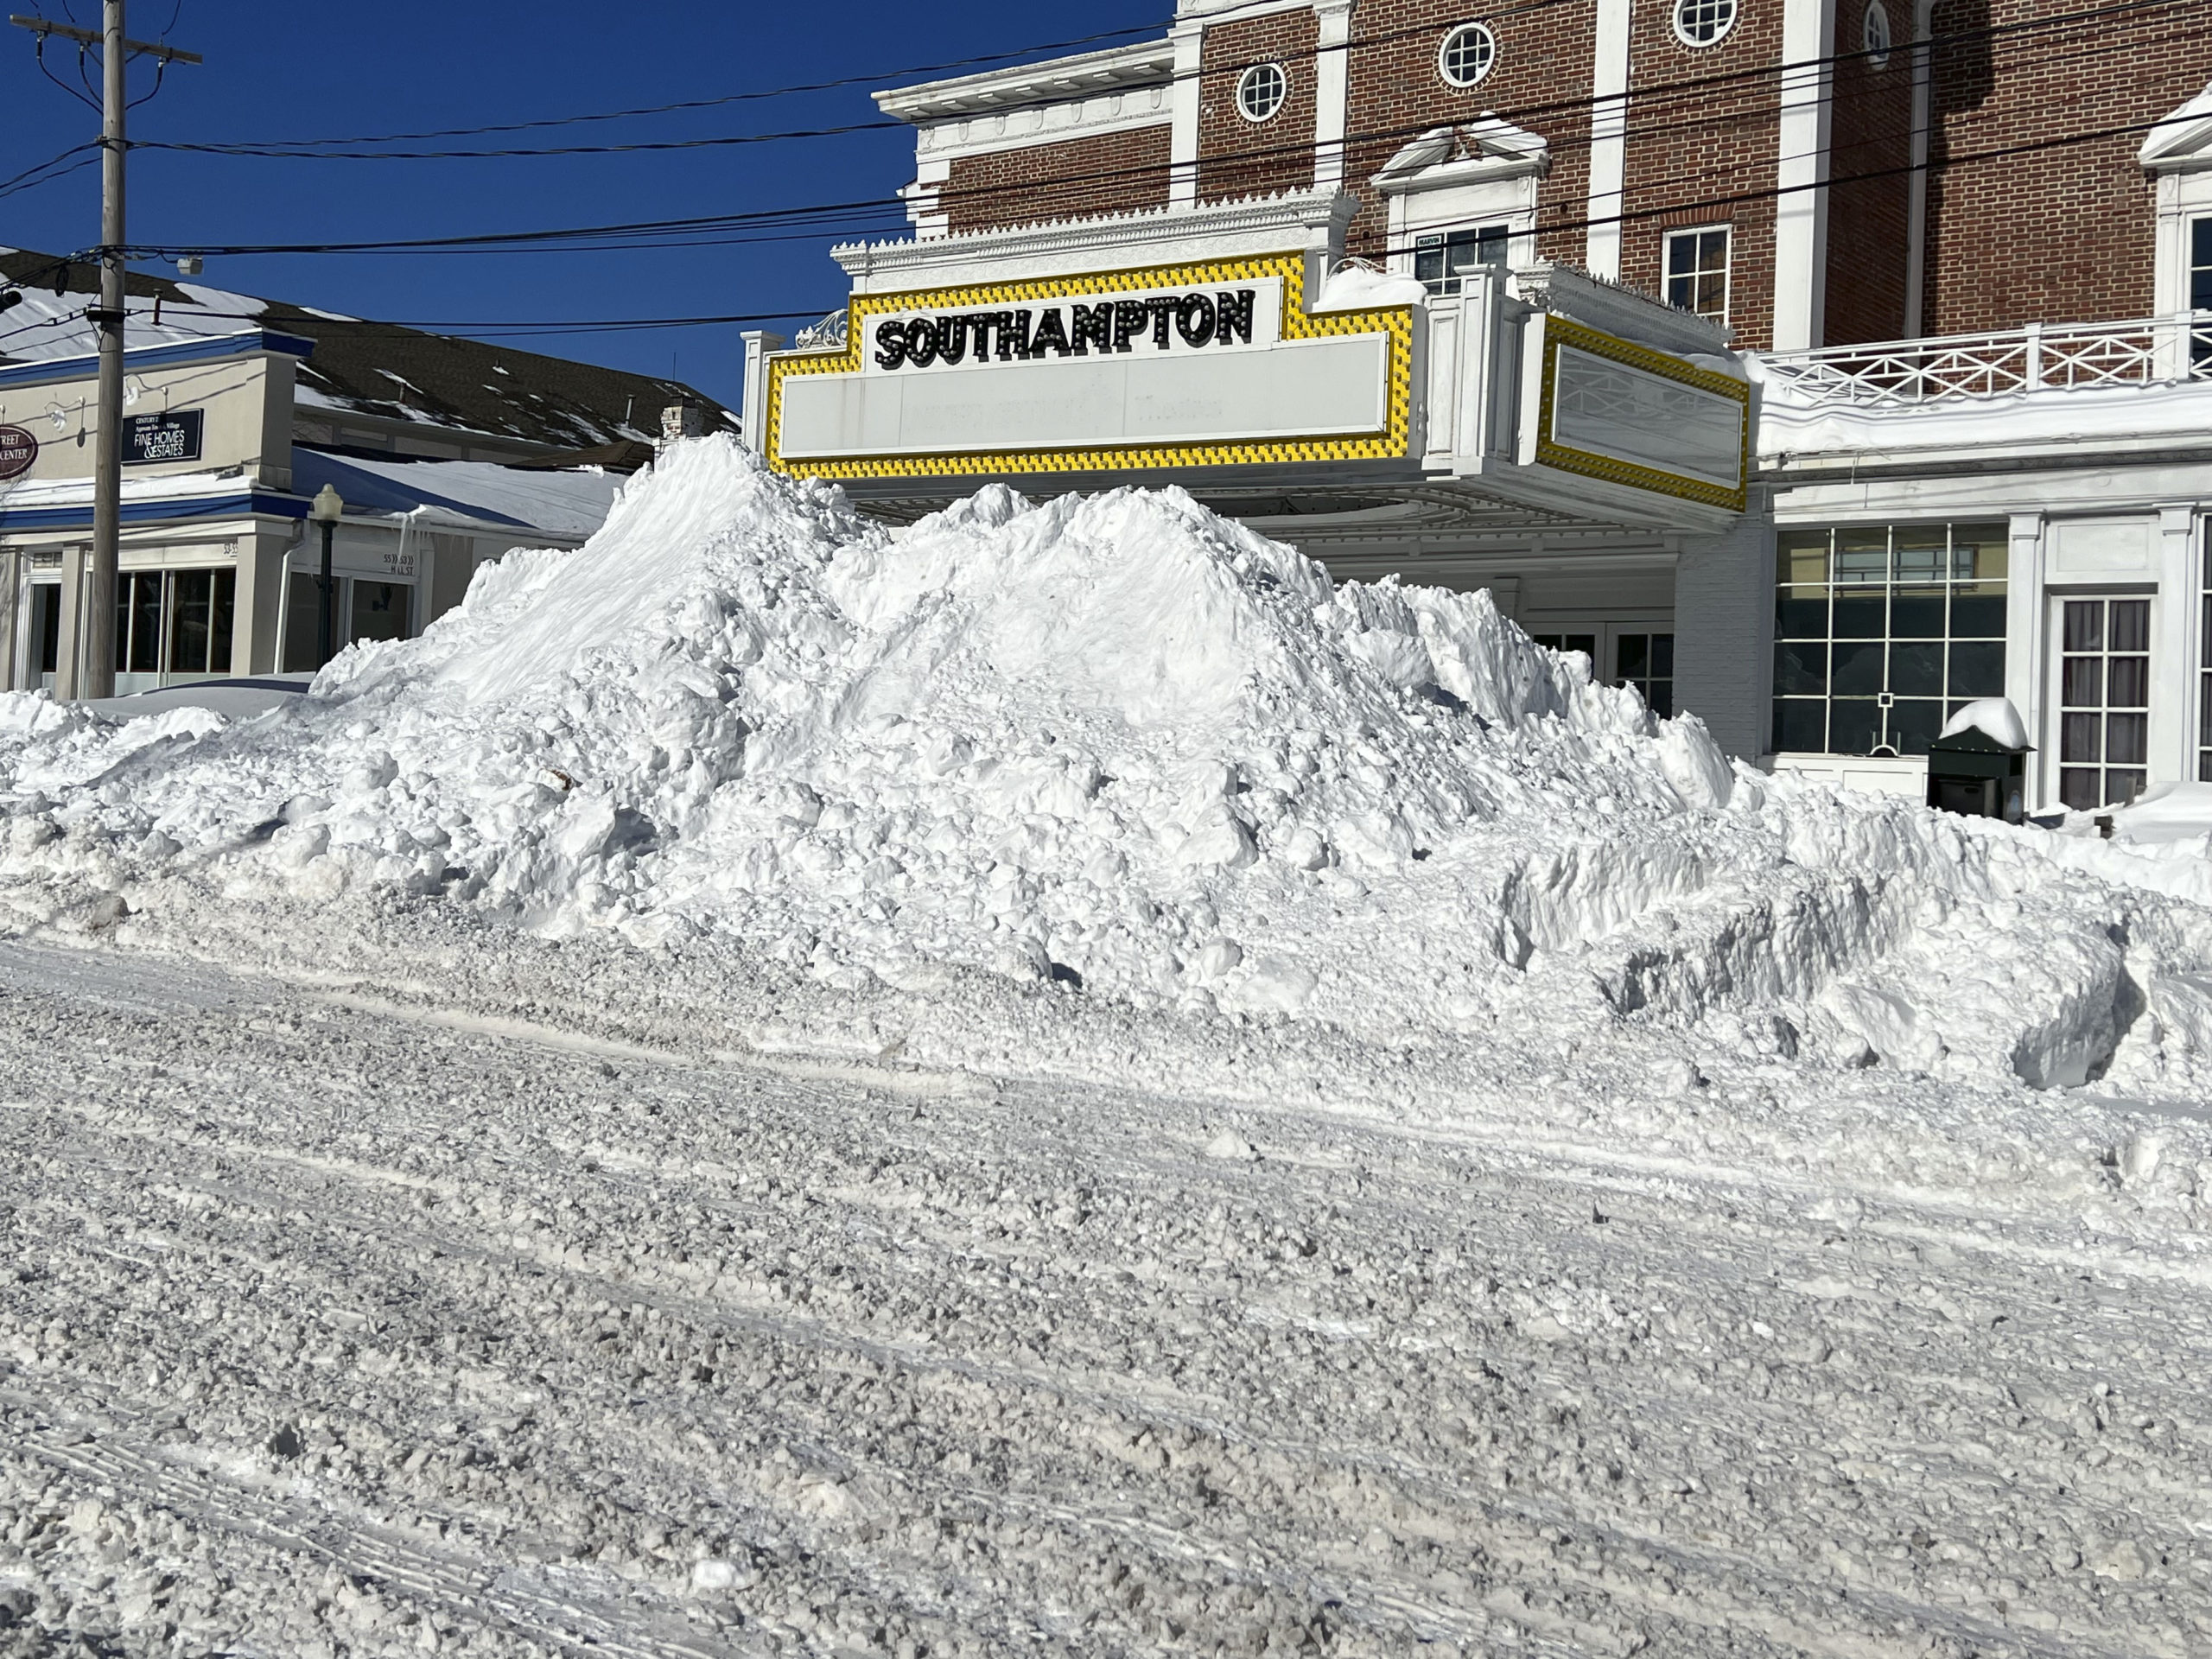 Snow that was cleared from the road is piled up to the marquee at the Southampton movie theater on Sunday.   DANA SHAW